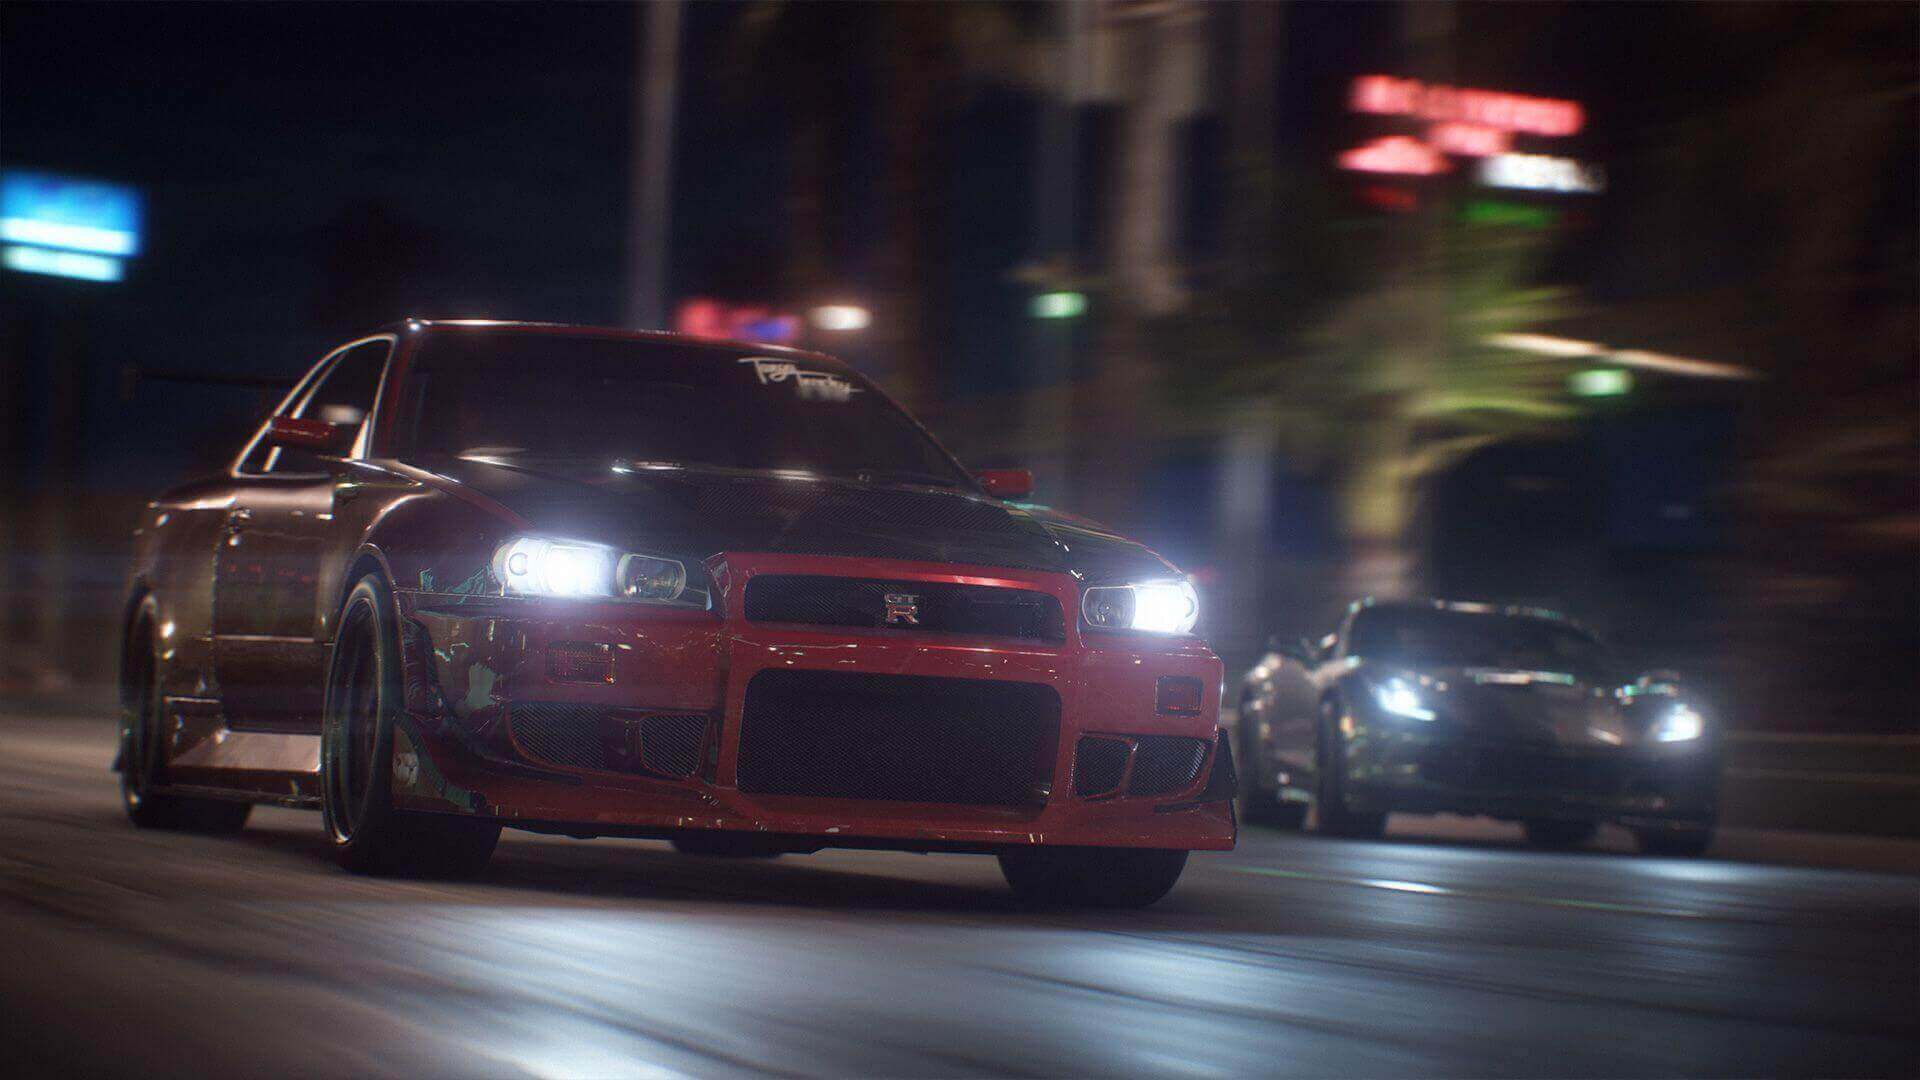 Need for Speed Payback_Bring Down The House_1080p_clean = R34GTR_screenshot4_1080